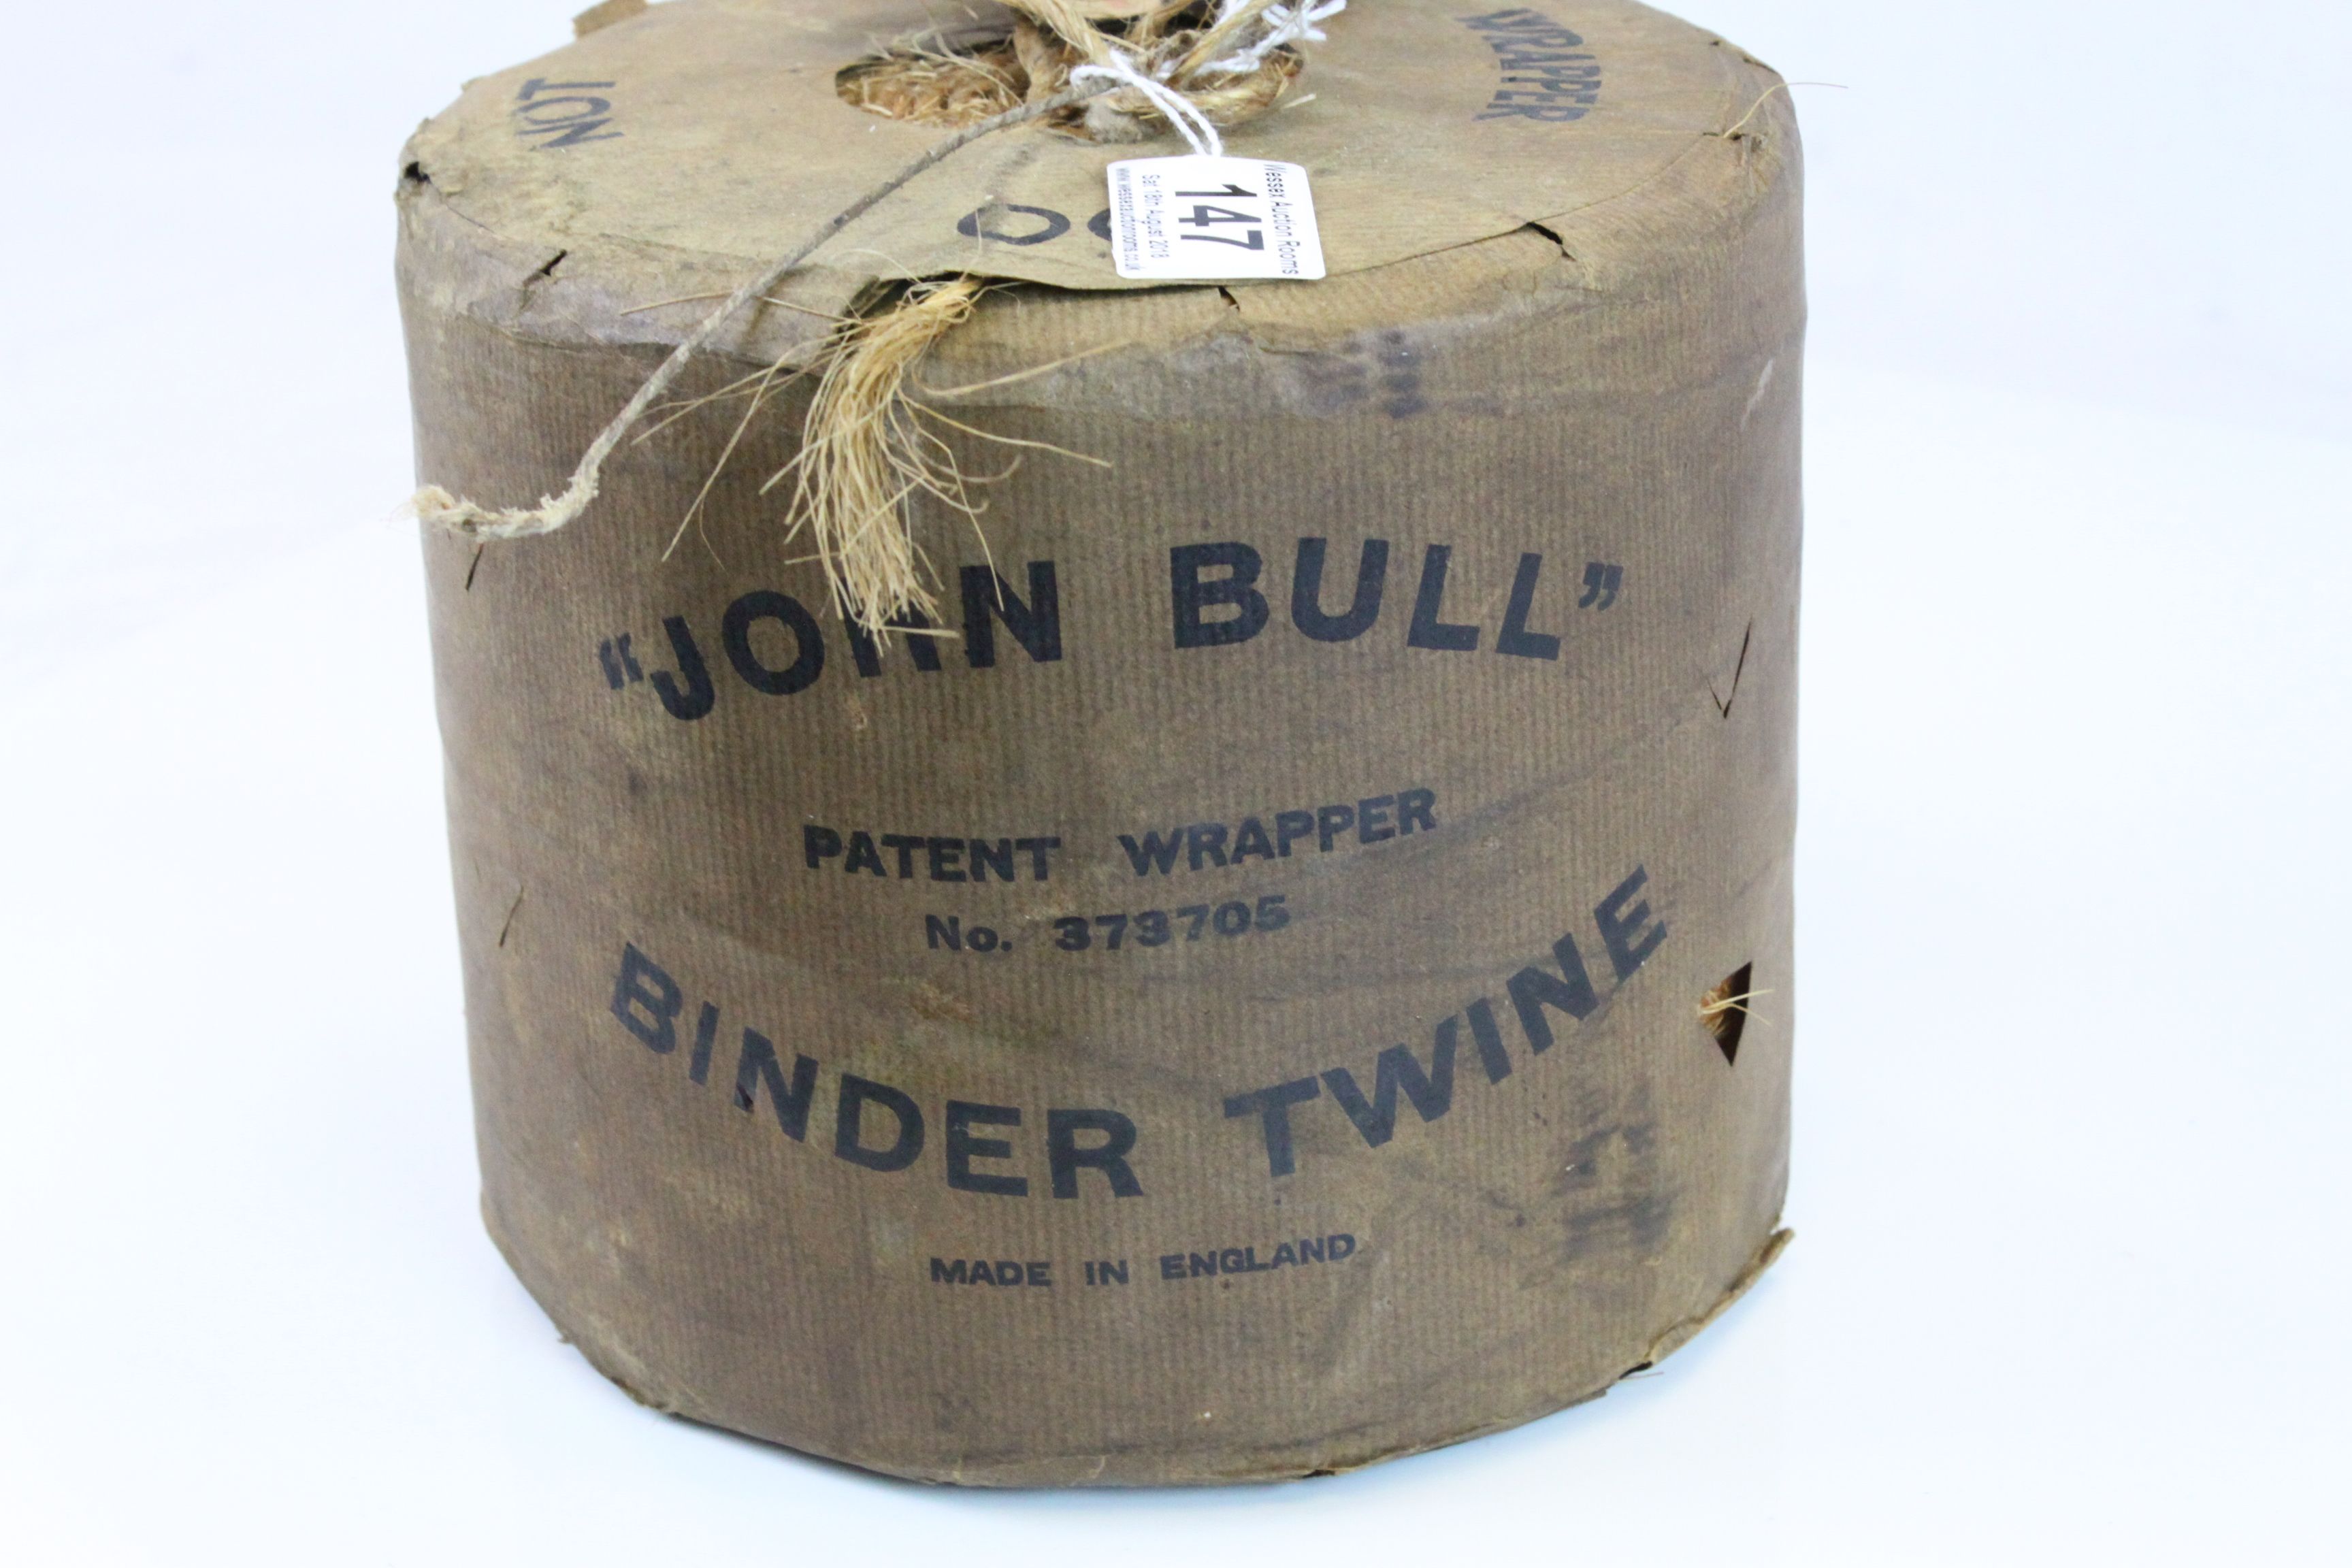 Vintage Wrapped Roll of Binder Twine marked ' John Bull Binder Twine, patent wrapper no. 379705 ' - Image 2 of 4